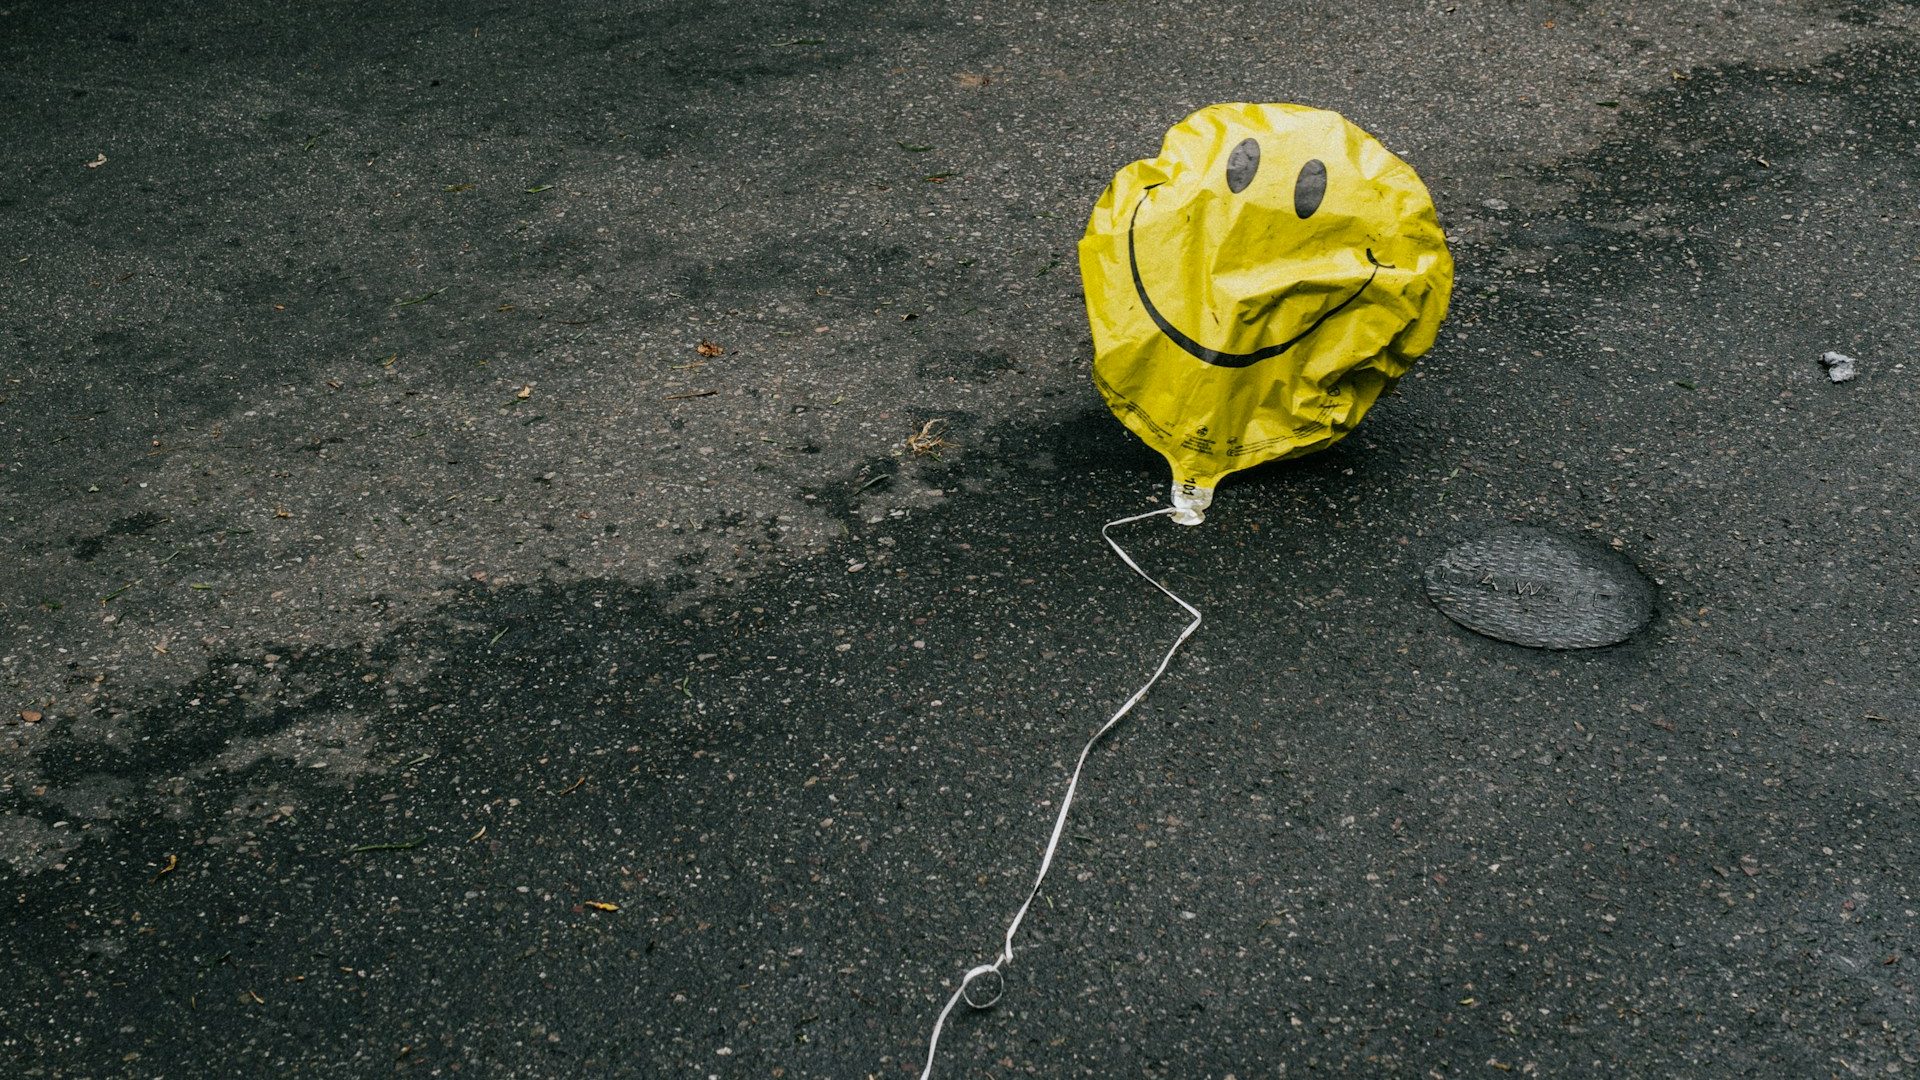 A yellow balloon lying on the ground in front of a car.